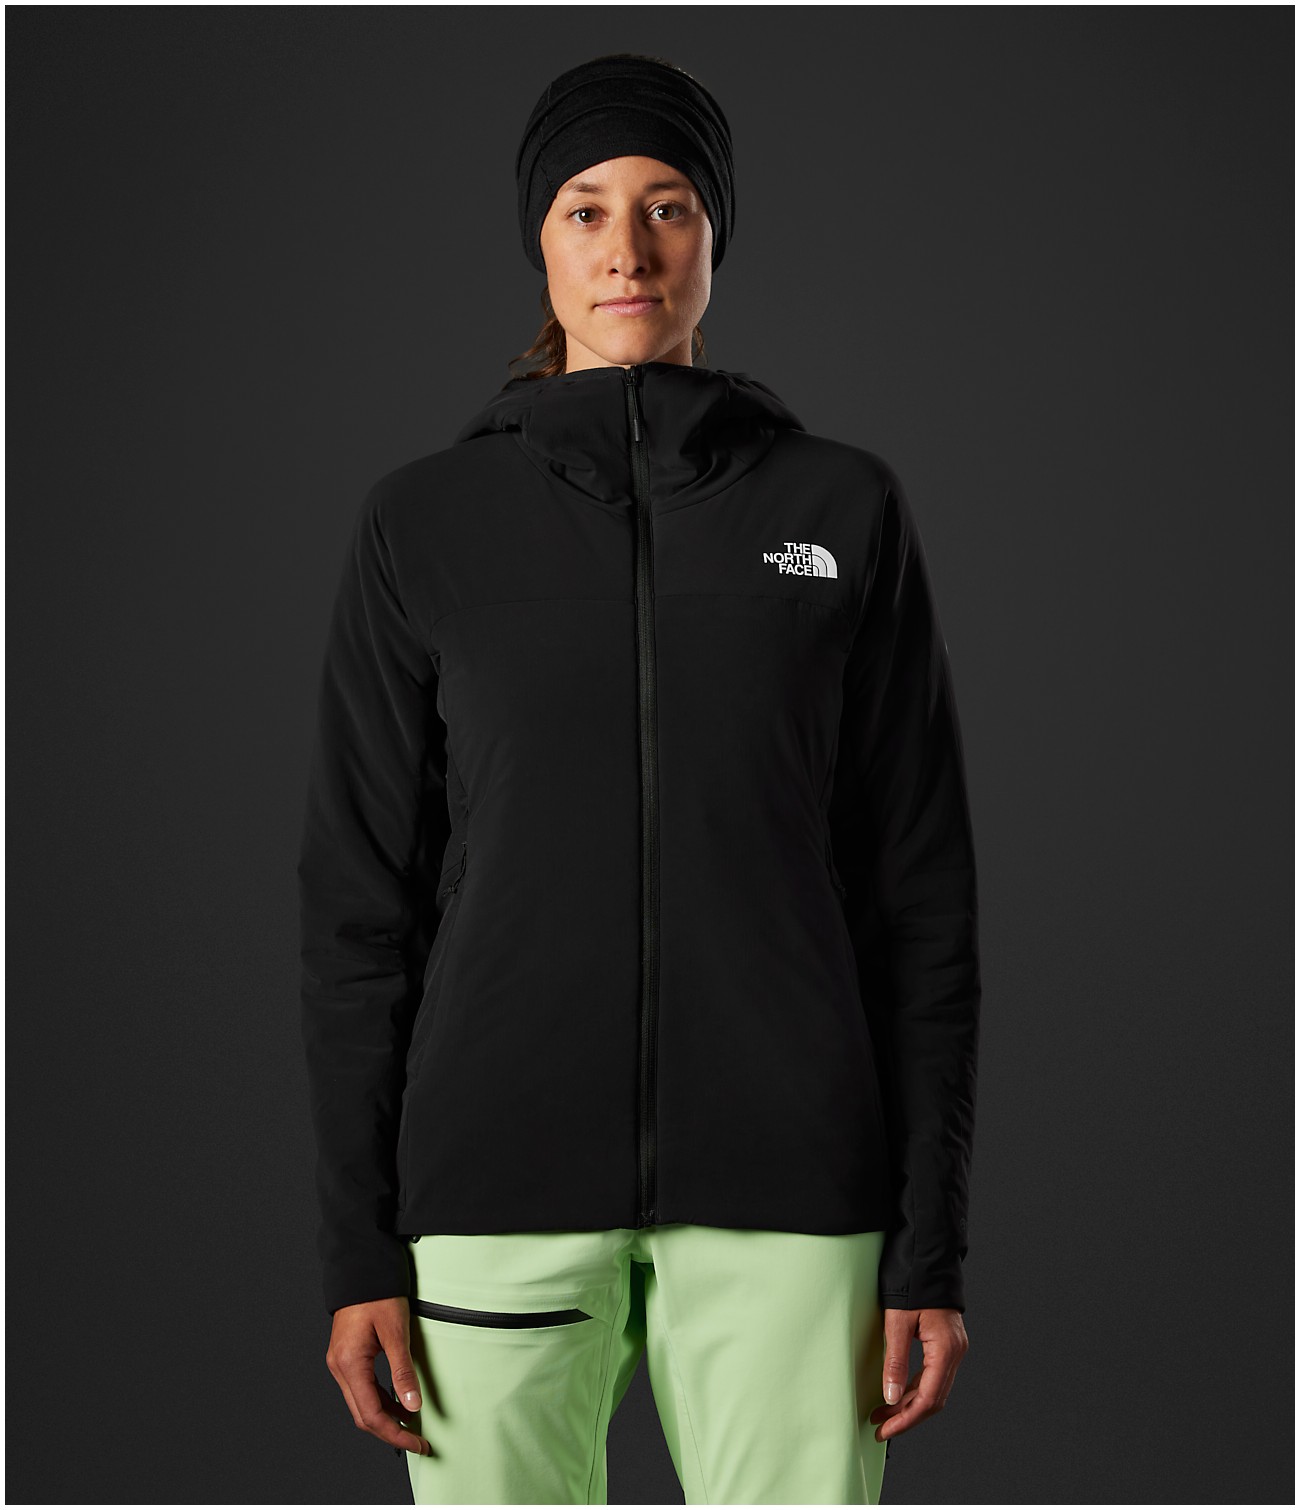 Unlock Wilderness' choice in the Black Diamond Vs North Face comparison, the Summit Series Casaval Hybrid Hoodie by The North Face